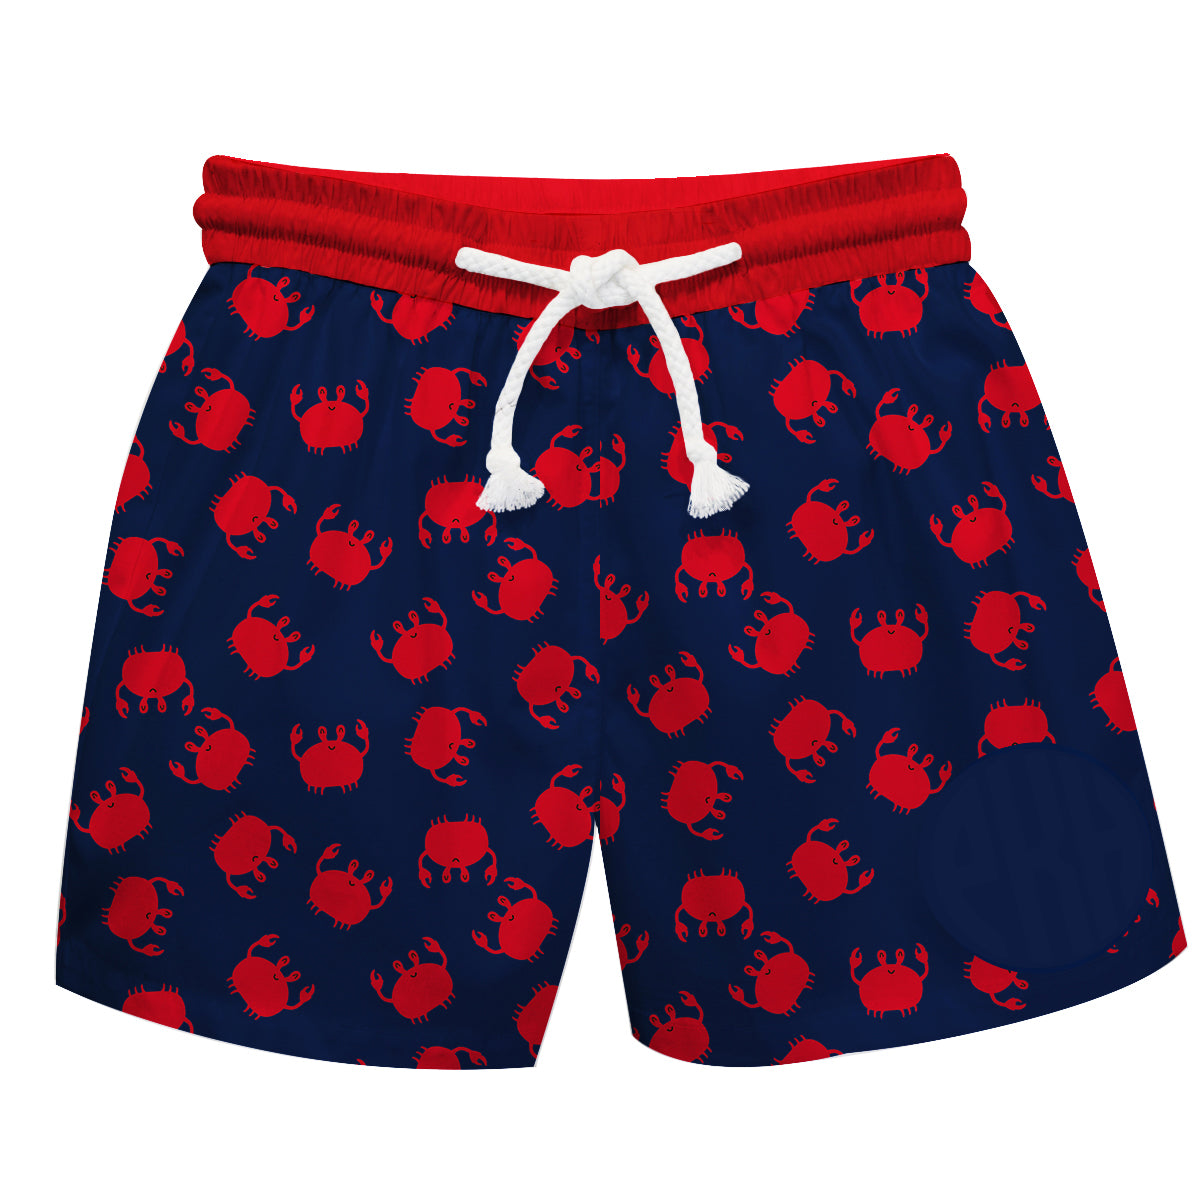 Crabs Print Personalized Monogram Navy and Red Swimtrunk - Wimziy&Co.